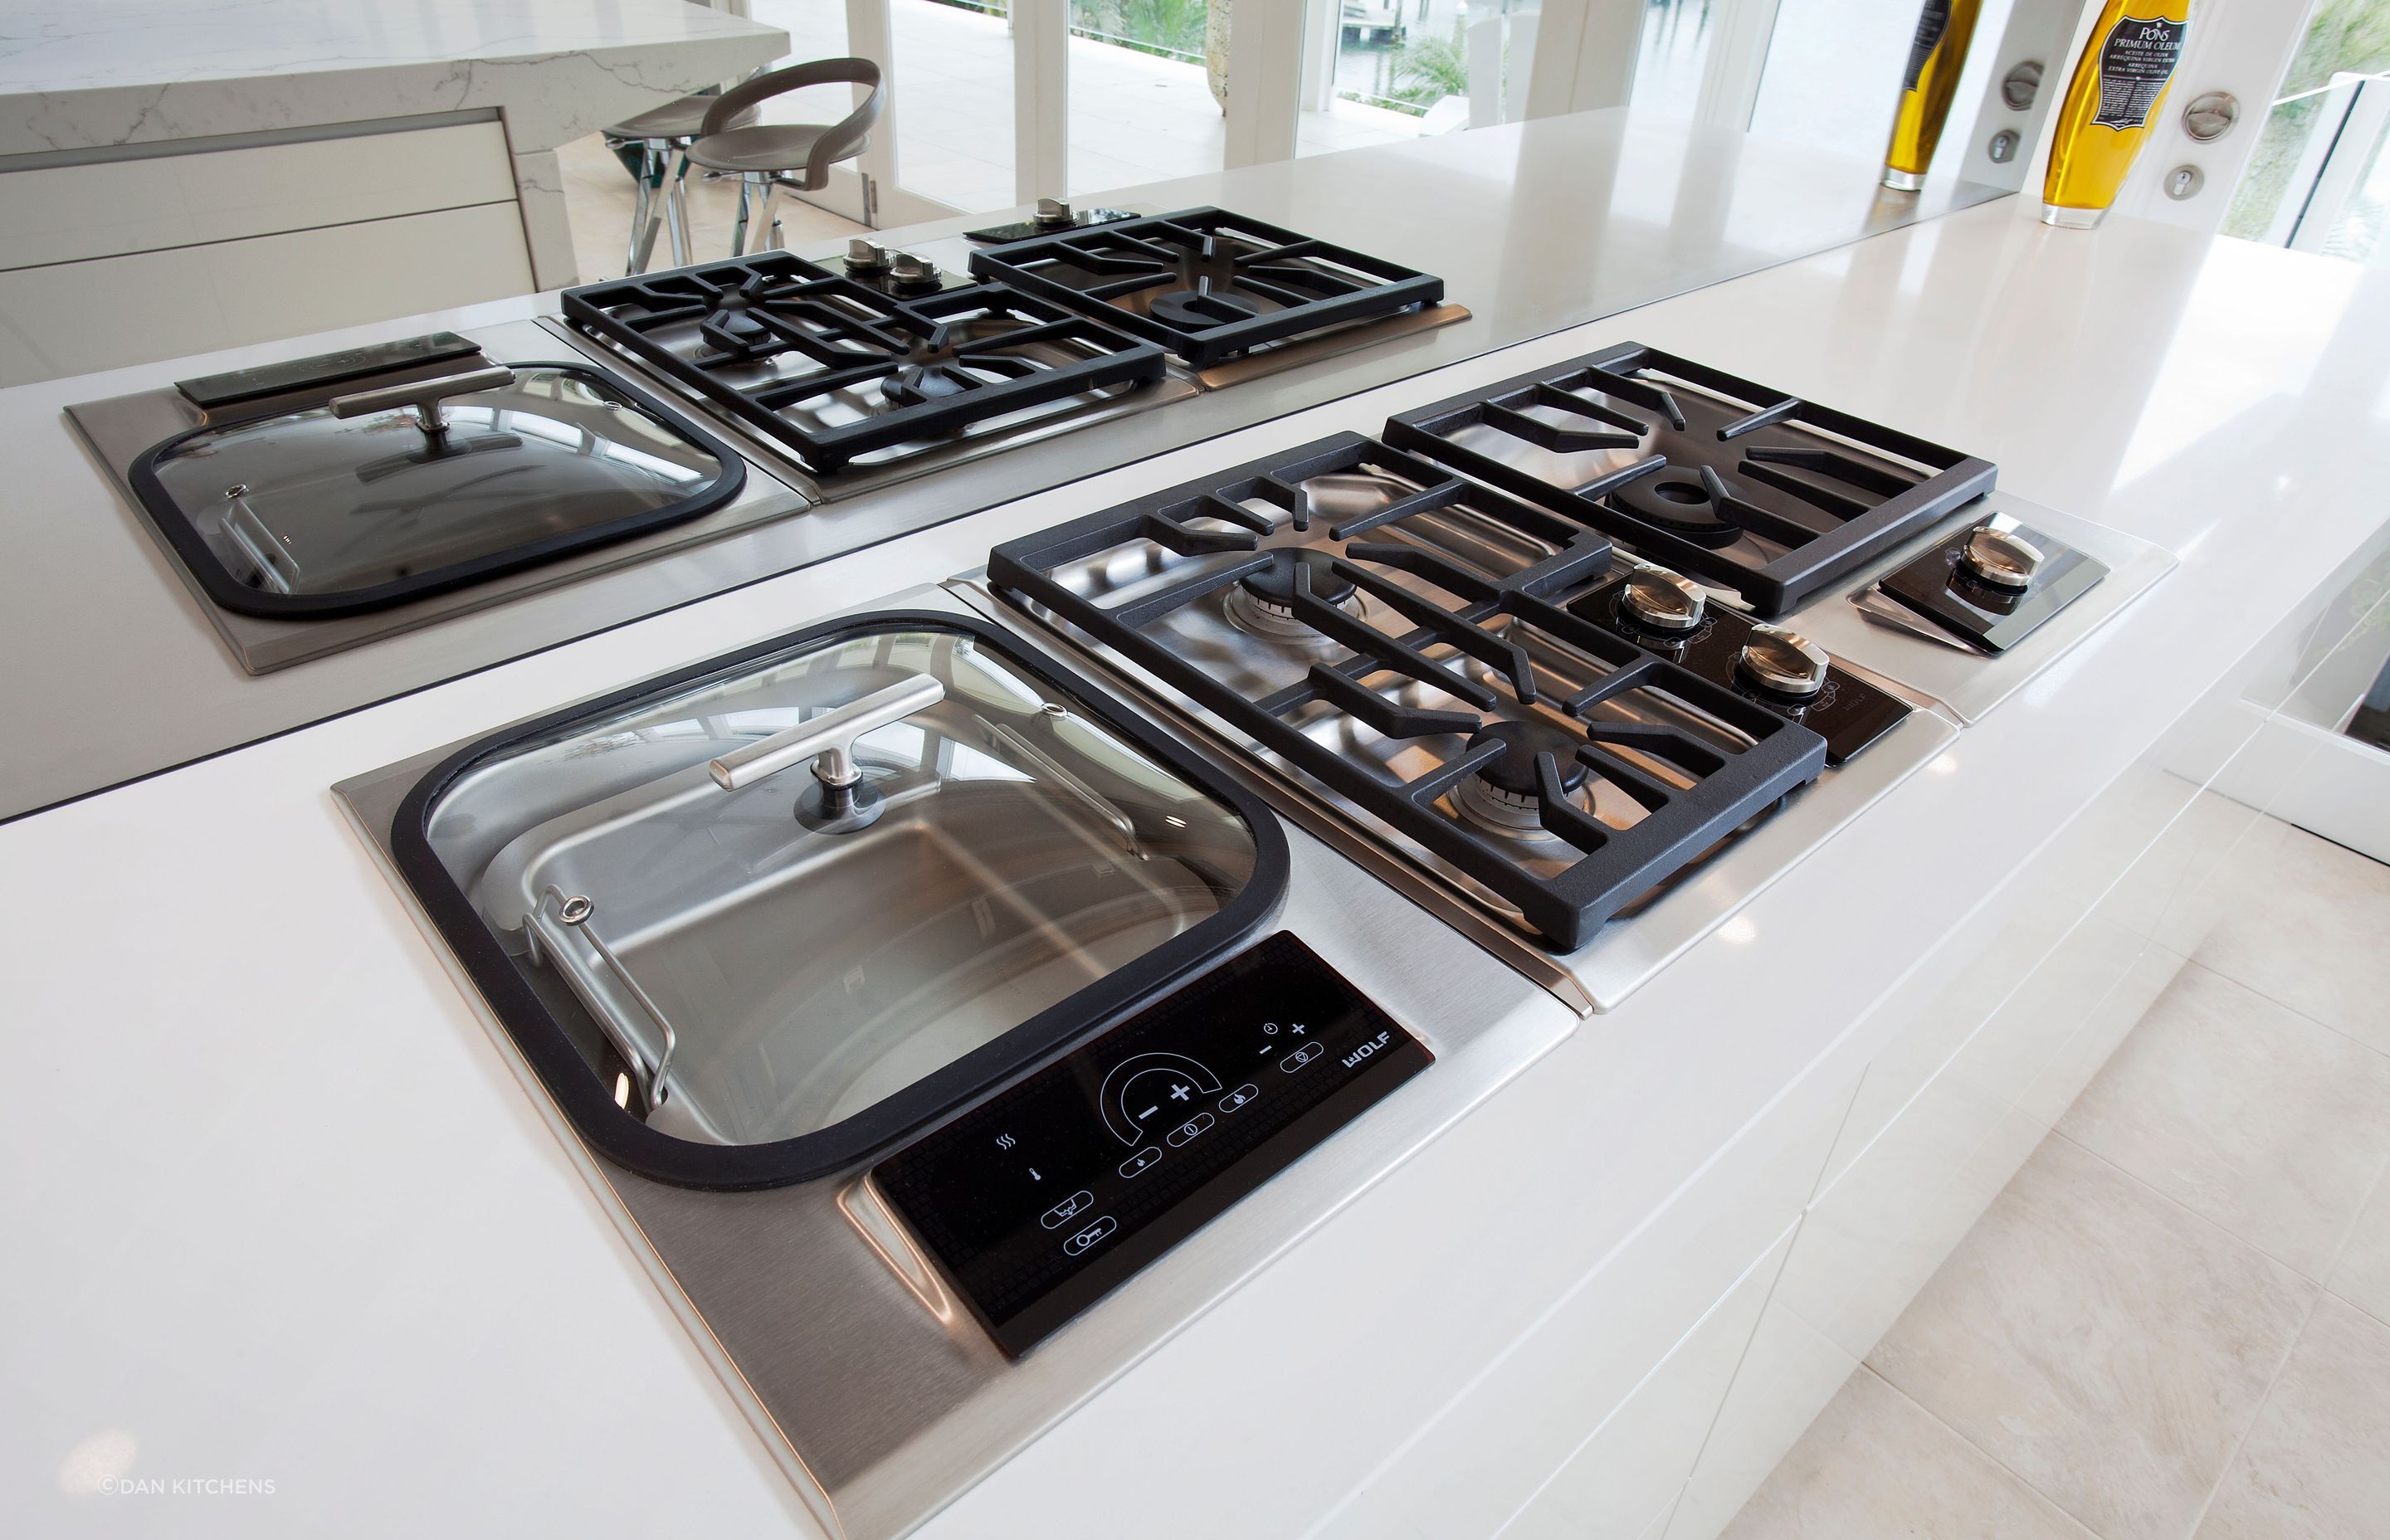 Wolf cooktop modules including a steamer, gas cooktop and wok burner